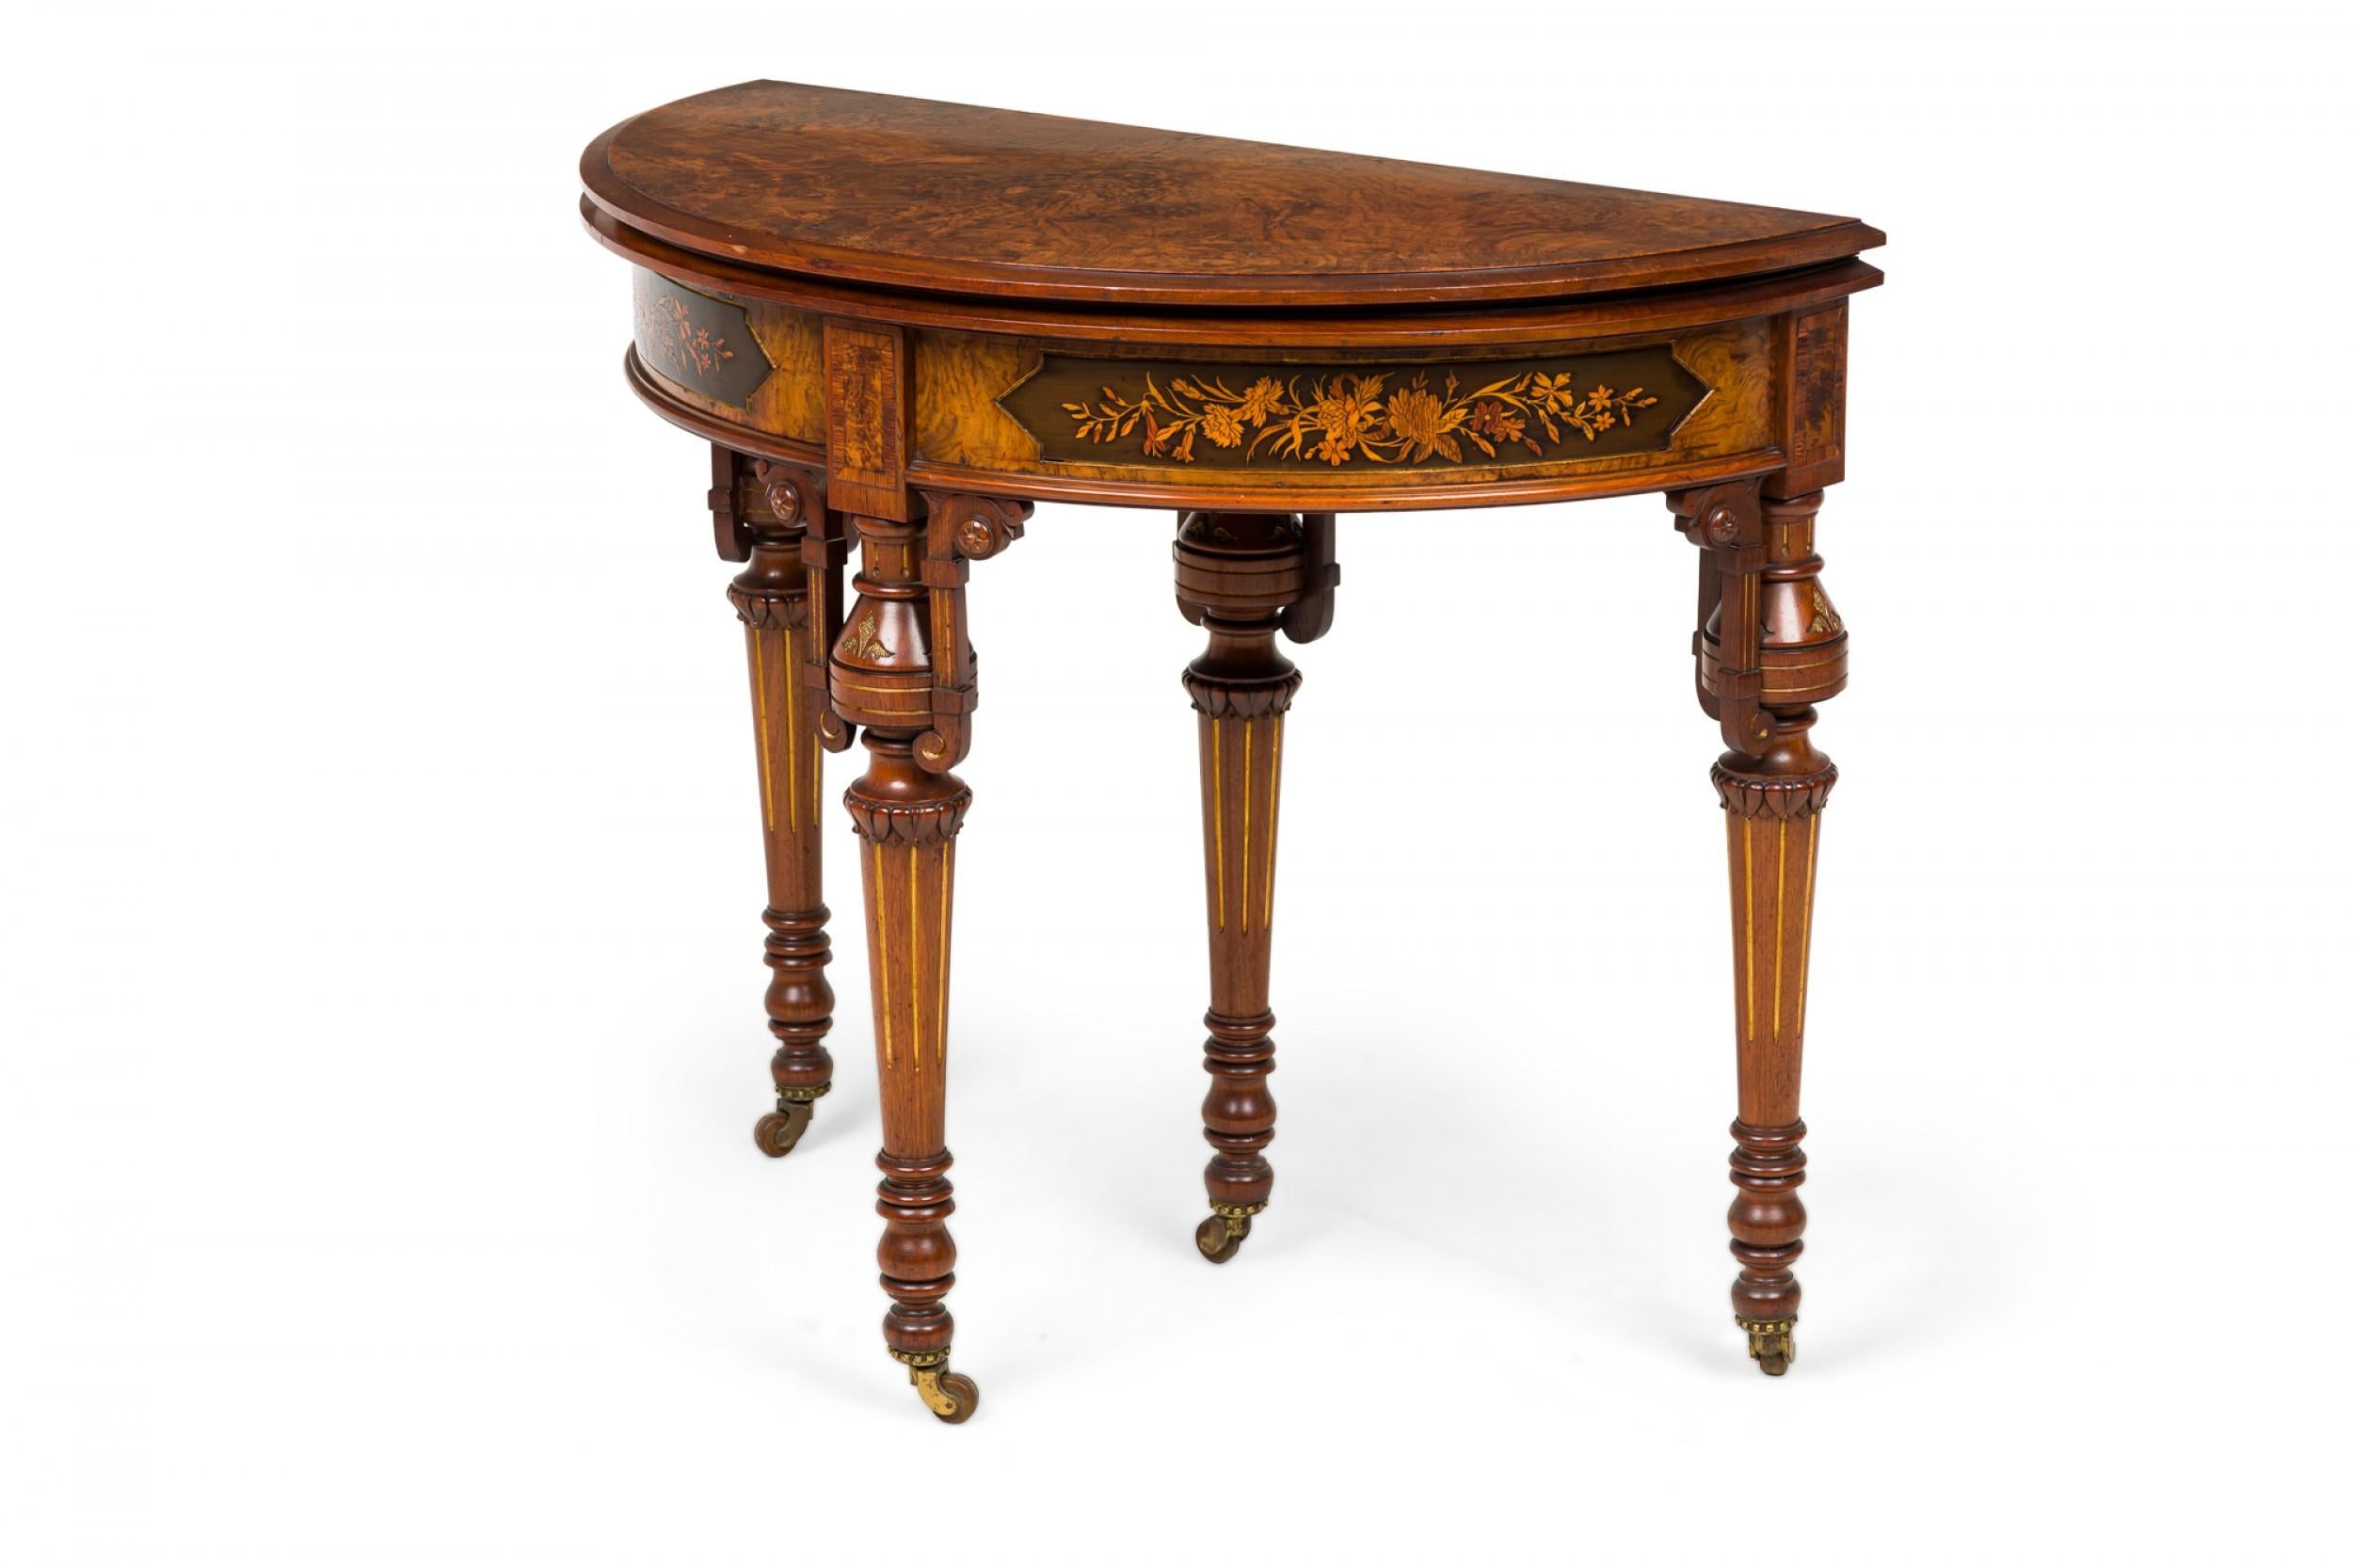 American Victorian demilune wooden console table with floral inlaid apron with gold detailing and a burl wood hinged top that unfolds with an extendable back leg to create a circular surface finished with green embossed leather, resting on 4 turned